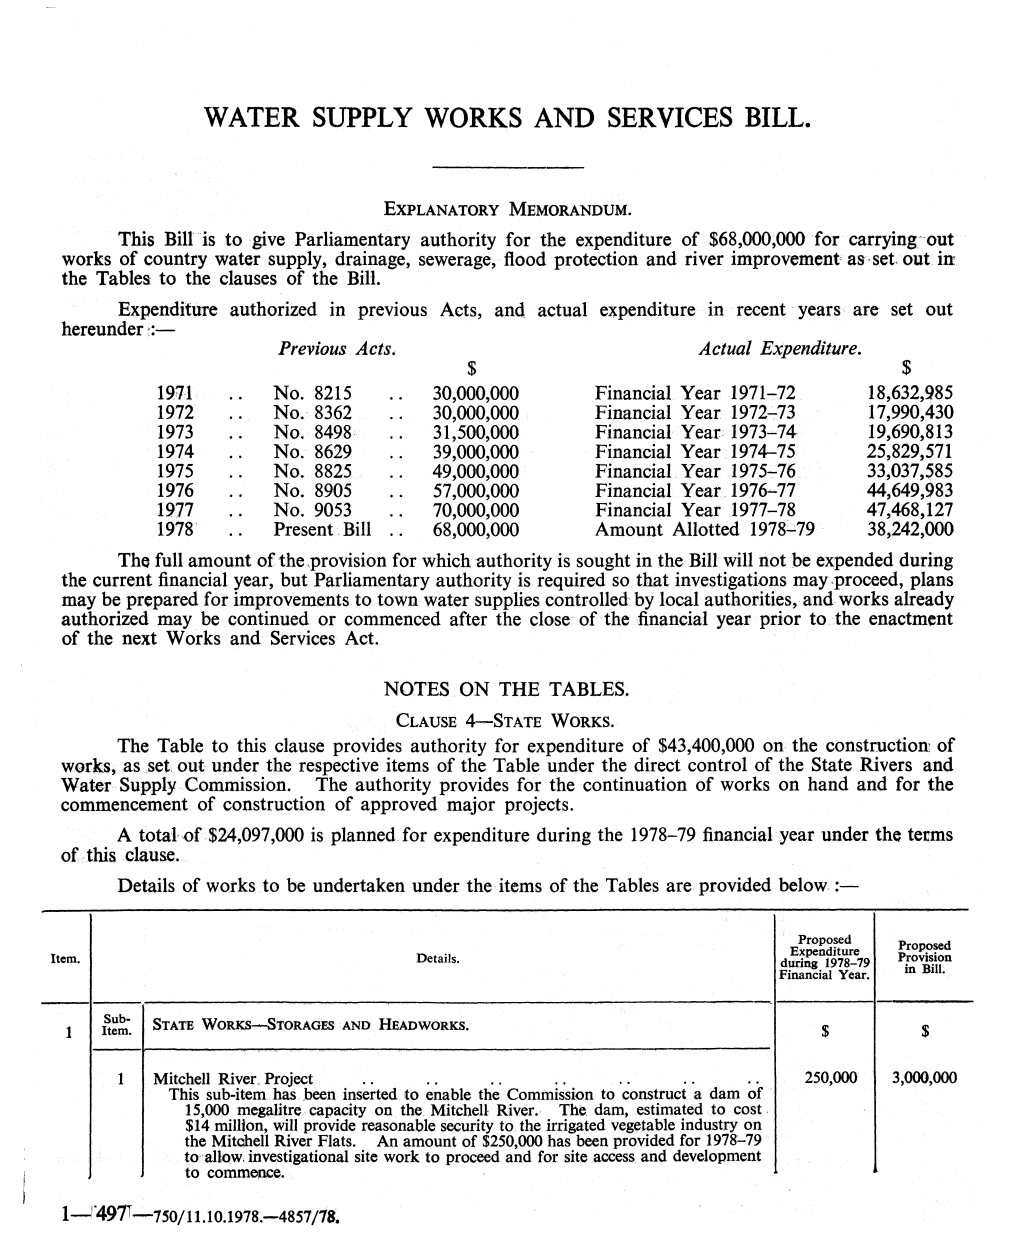 Water Supply Works and Services Bill.